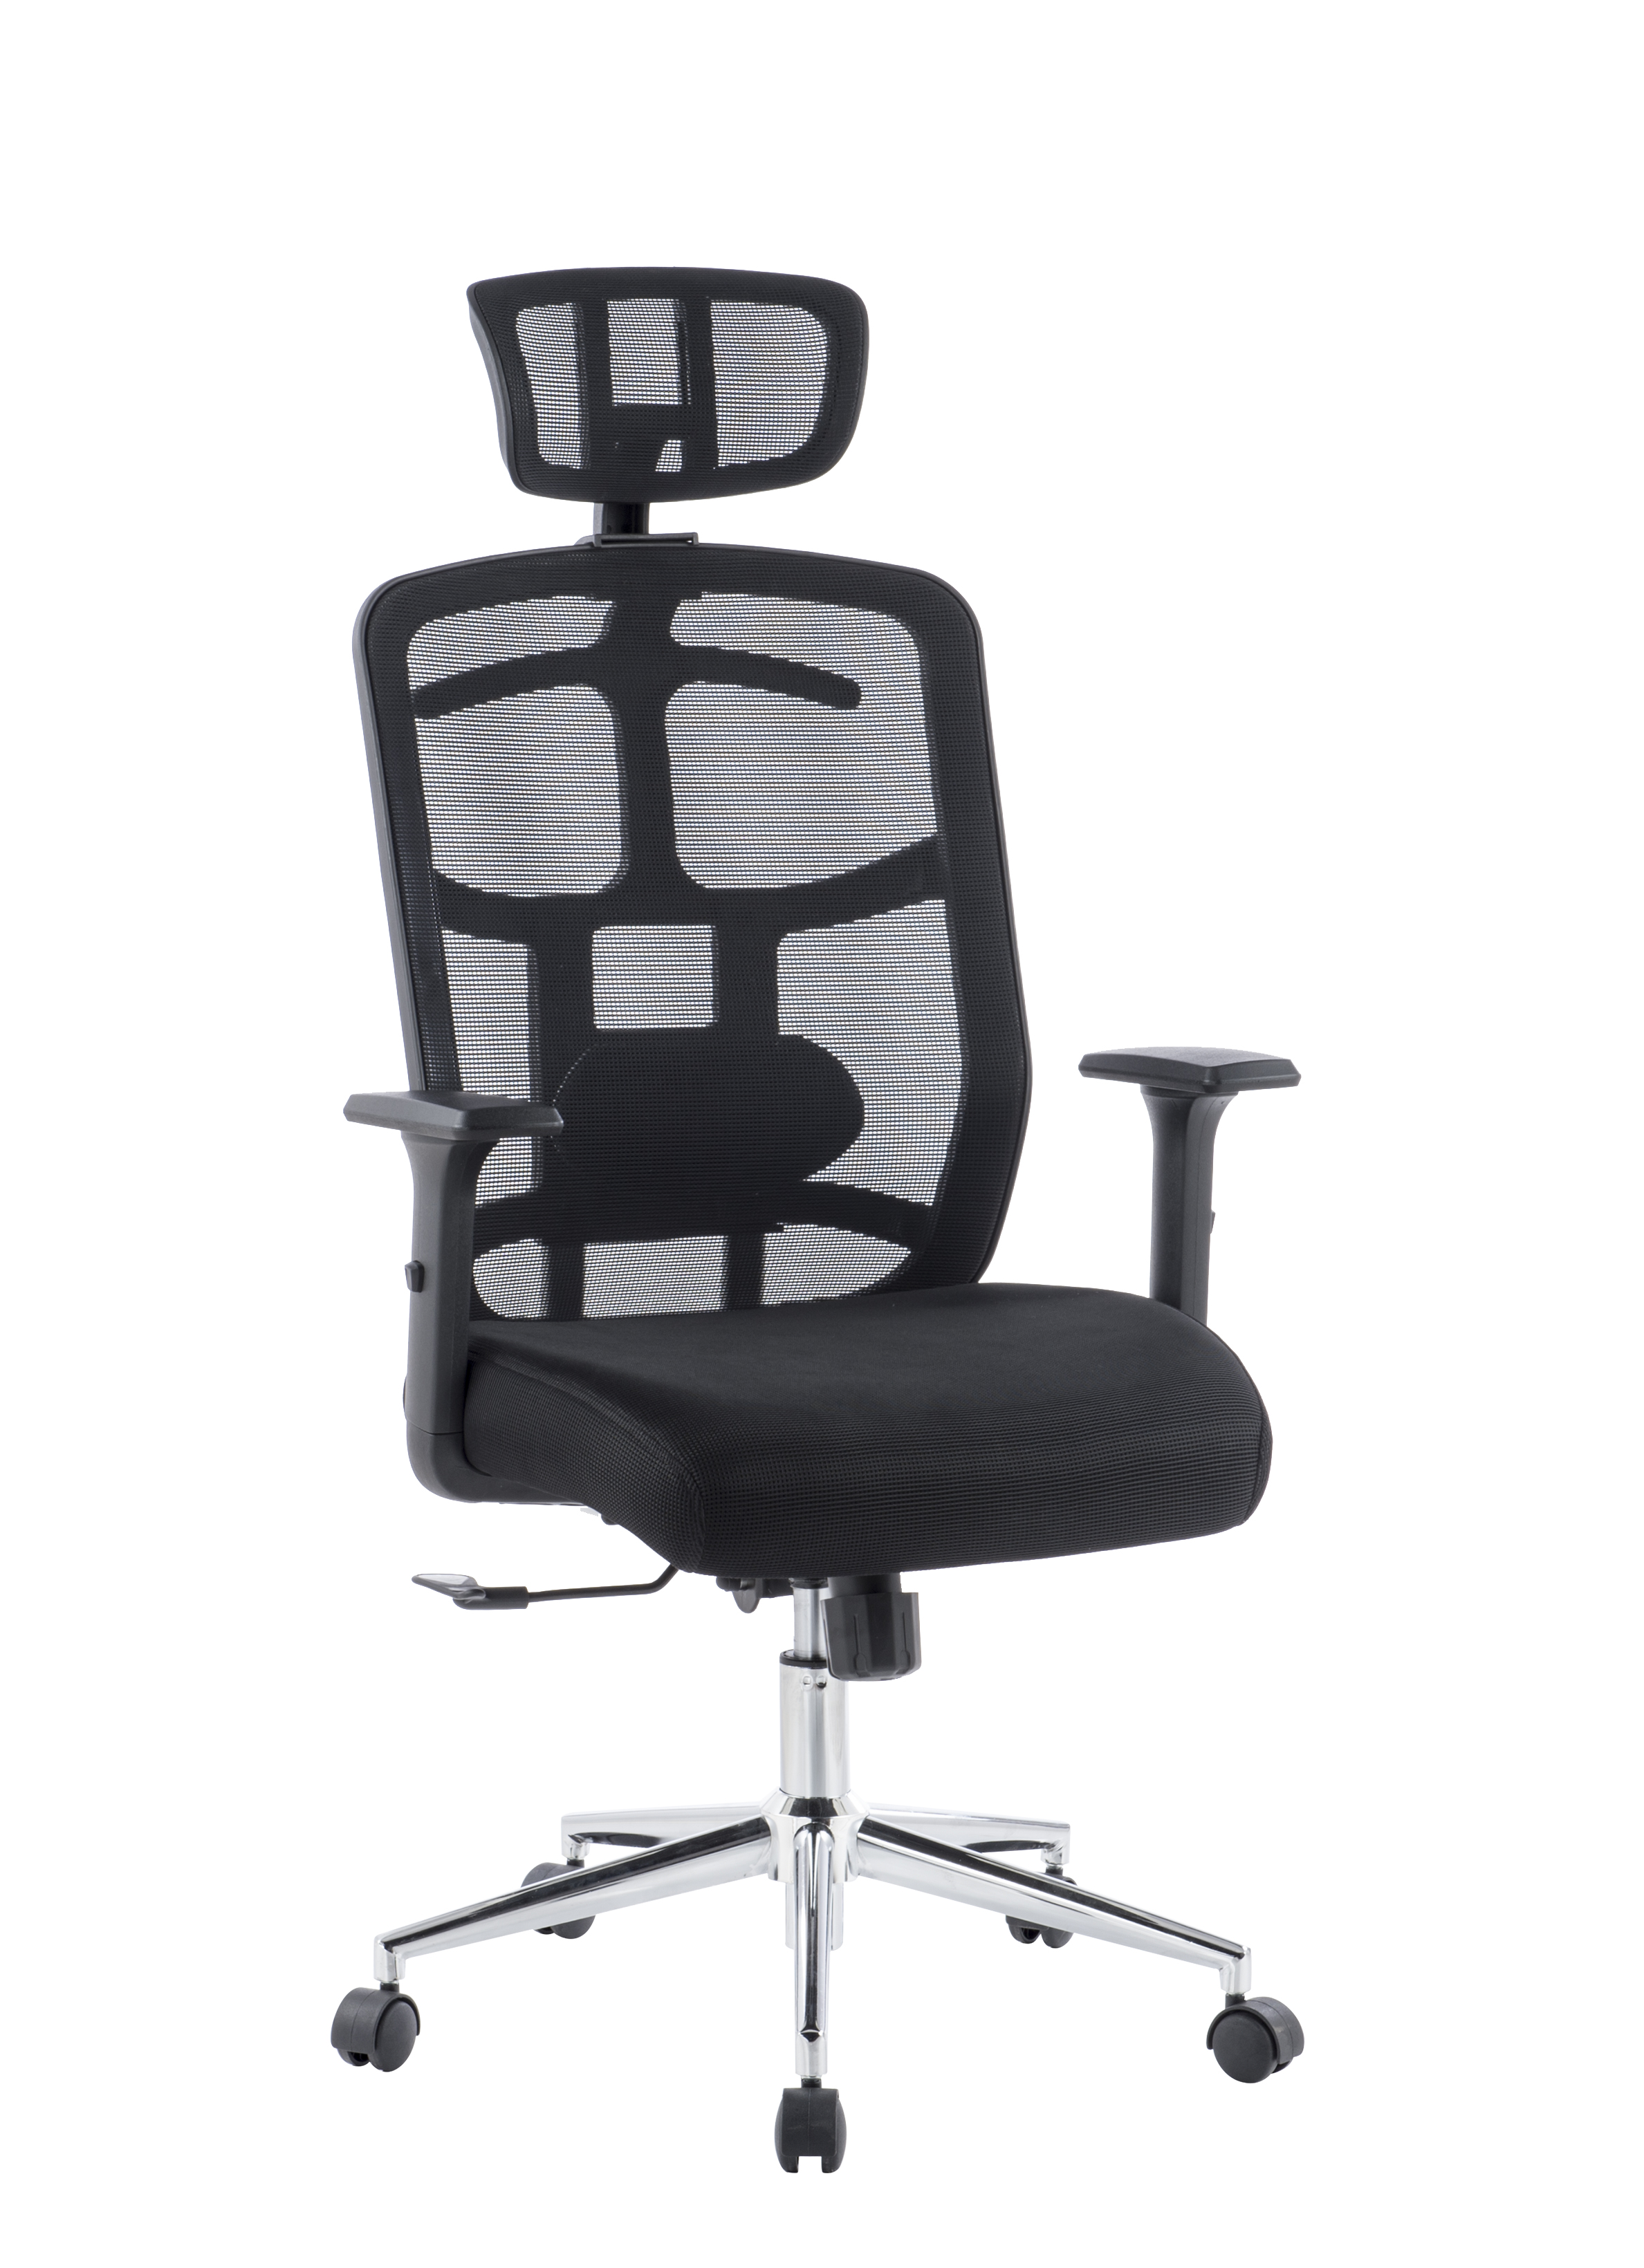 Office Chair With High Back Headrest And Chrome Base Black Office Chairs Office Furniture Office